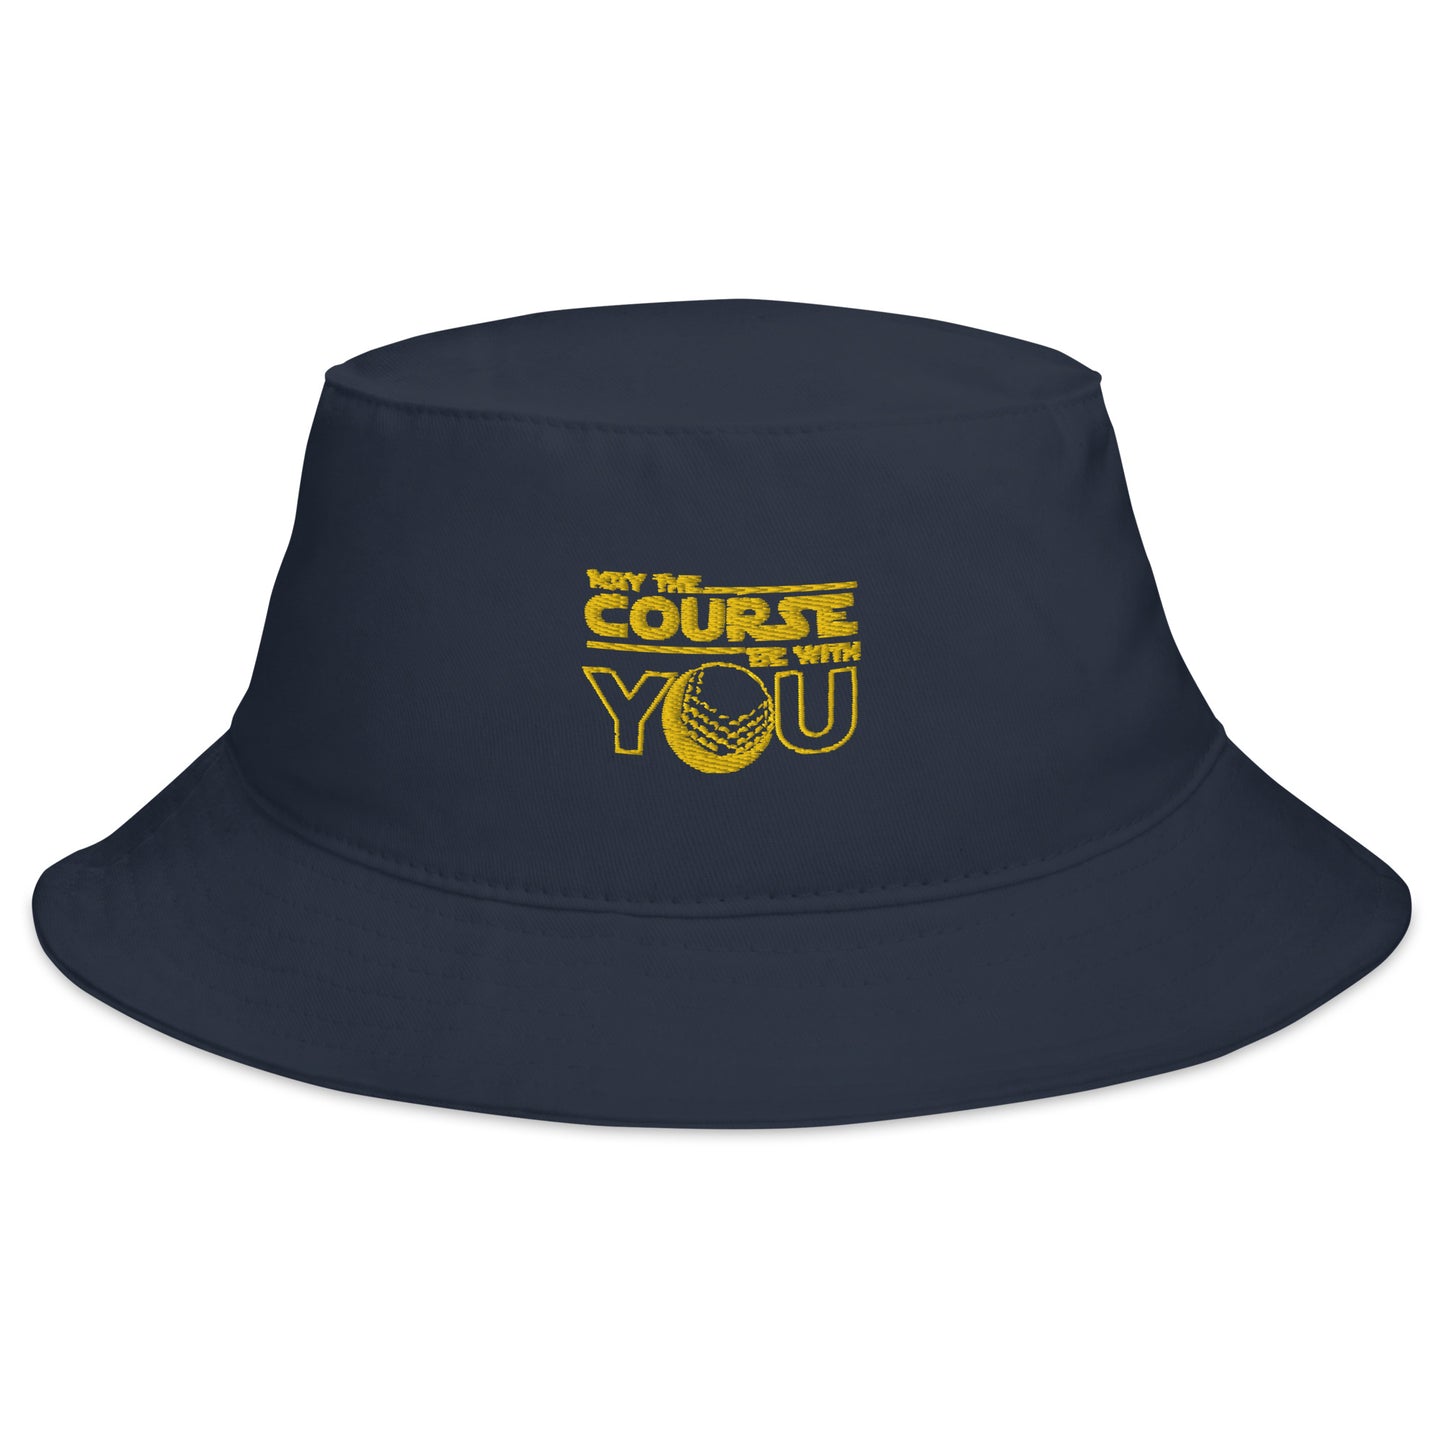 May The Course Be With You Bucket Hat